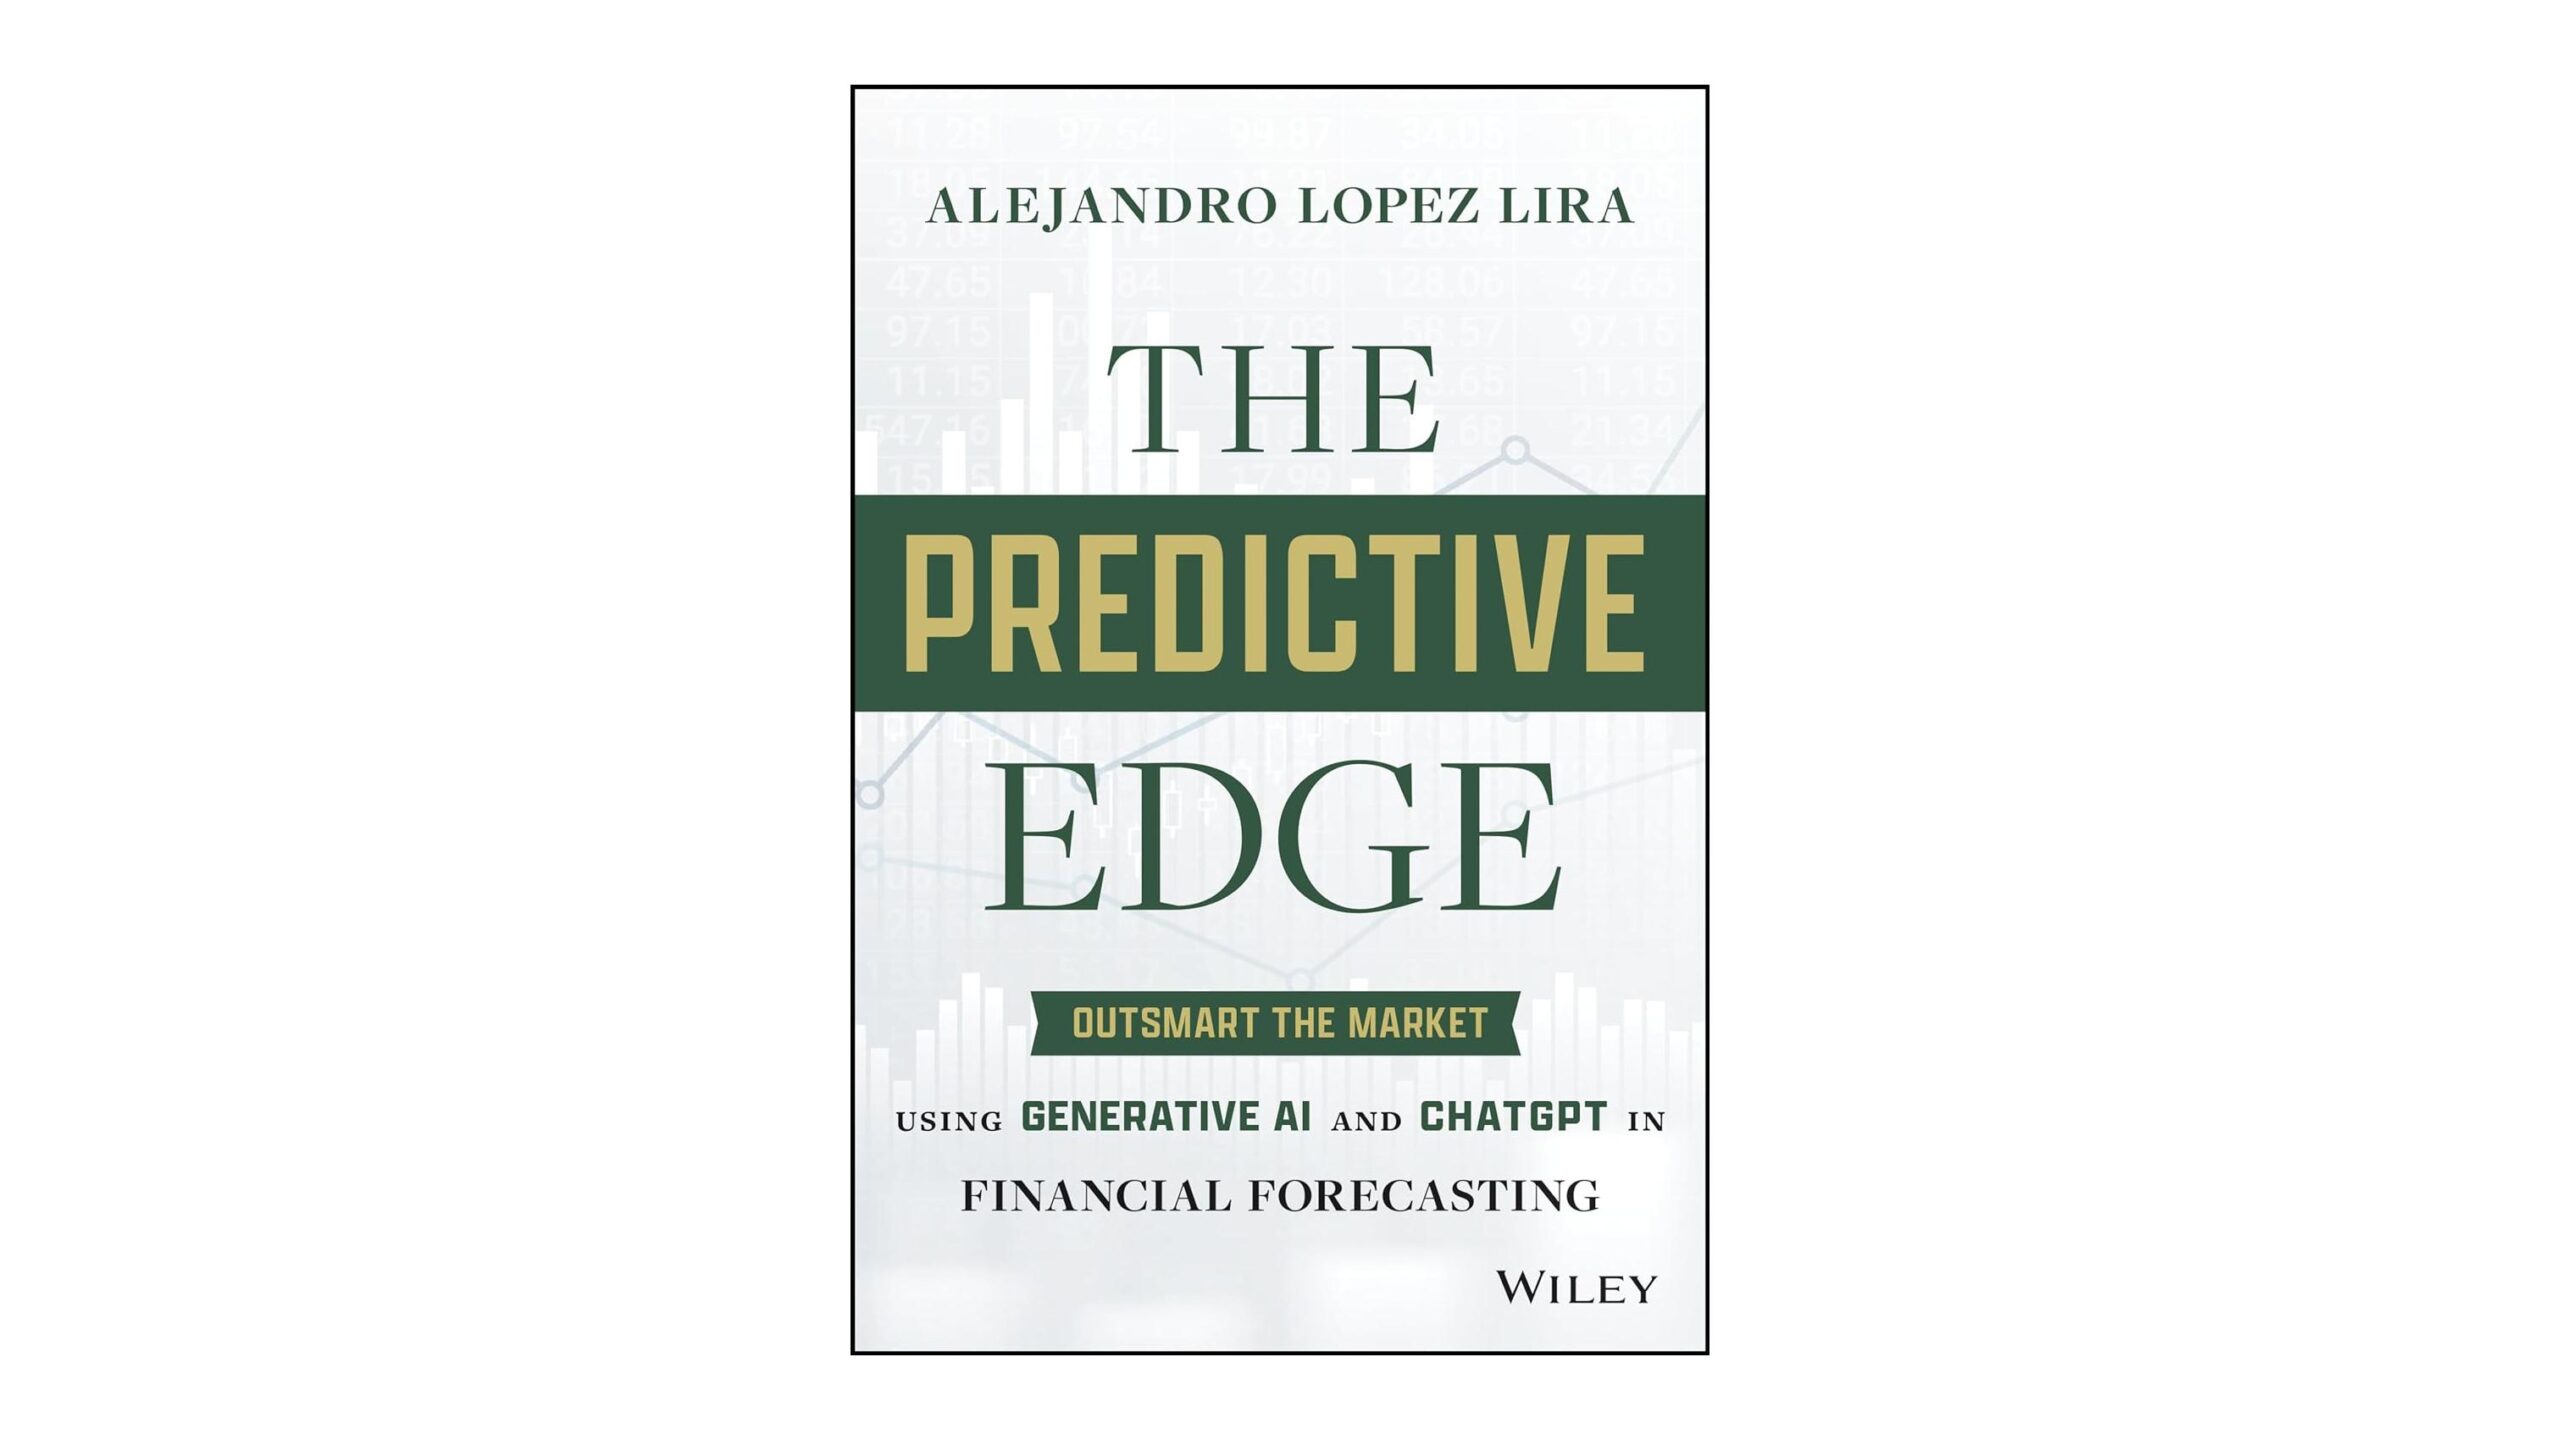 The Predictive Edge: Outsmart the Market using Generative AI and ChatGPT in Financial Forecasting